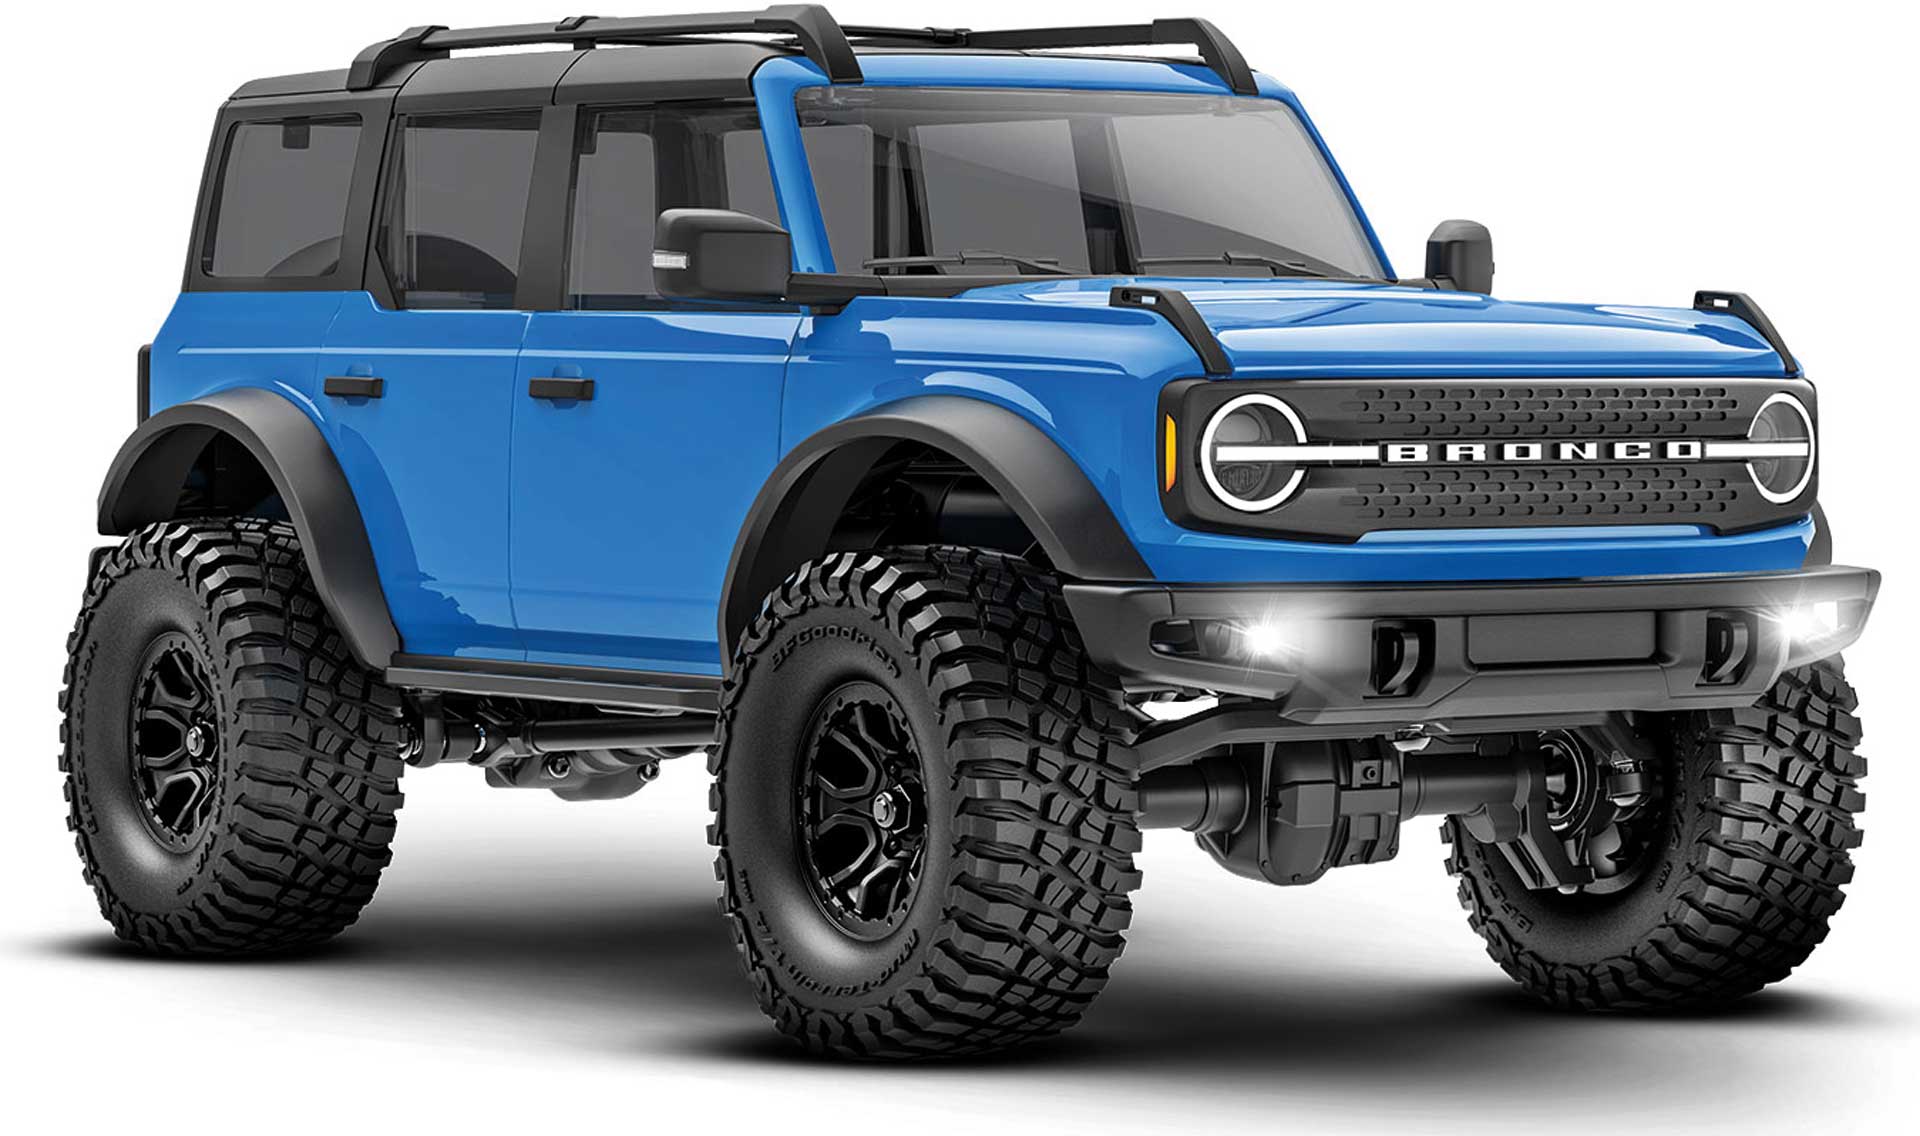 TRAXXAS TRX-4M Ford Bronco blue 1/18 4WD RTR Scale Crawler with batterie/charger